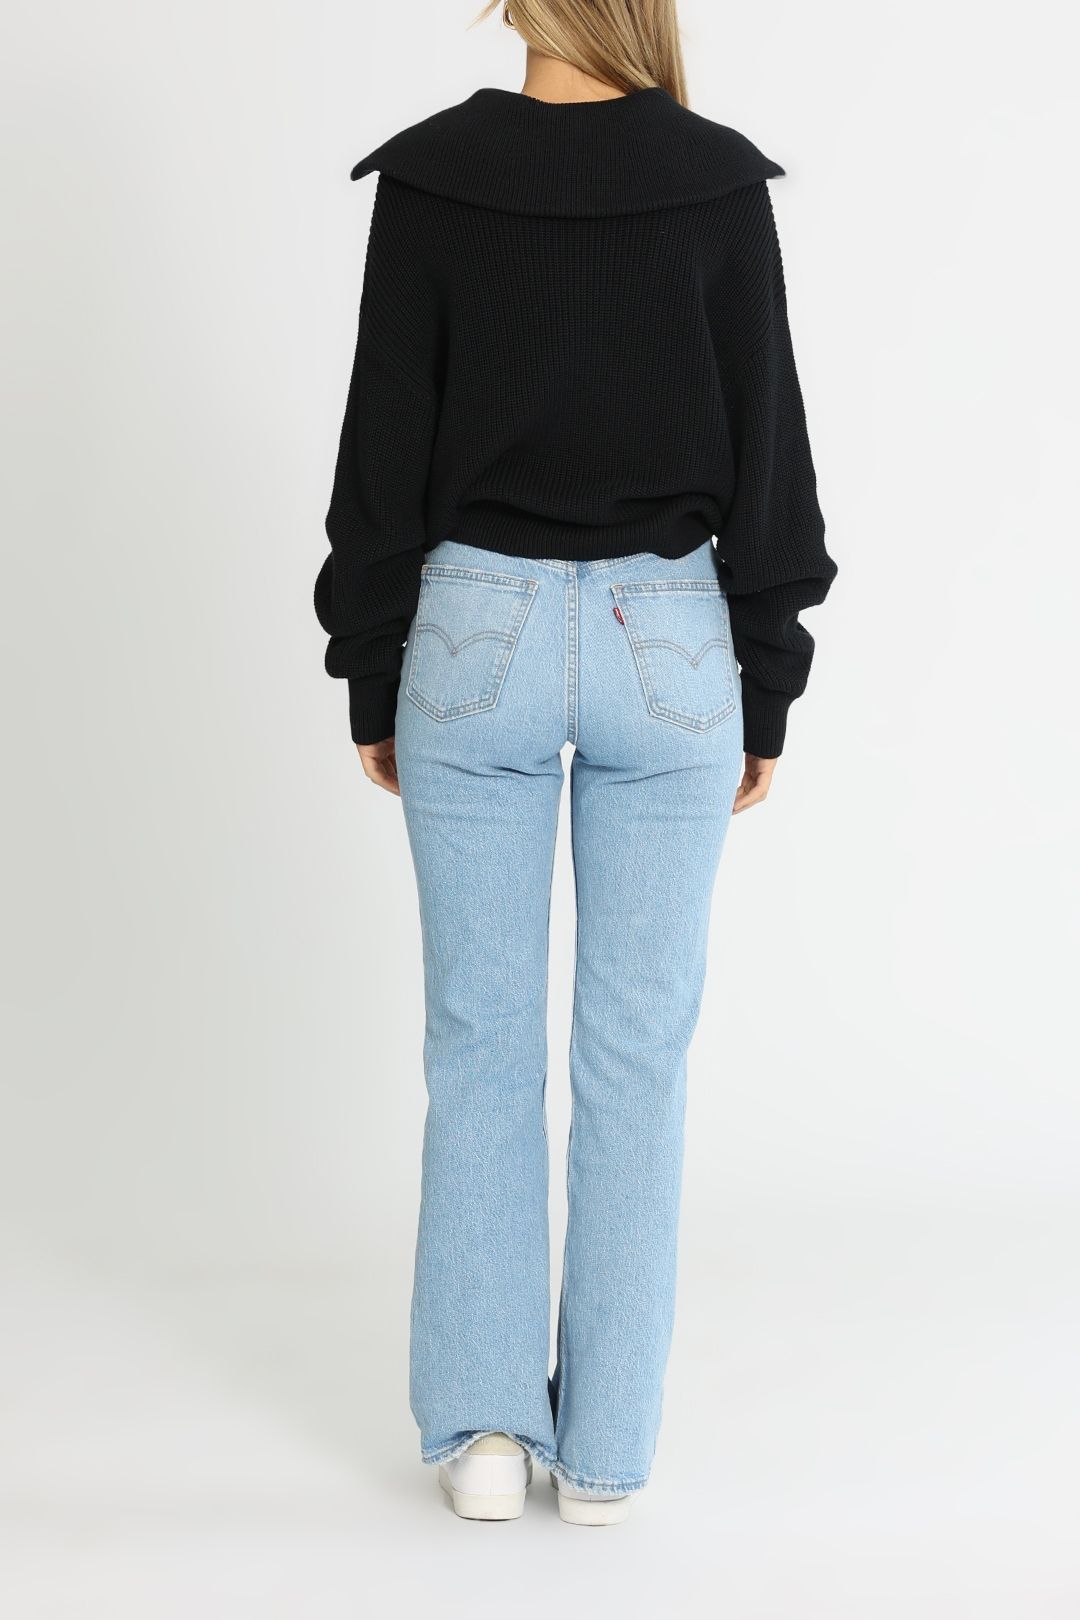 Elka Collective Lucy Knit Black Long Sleeves